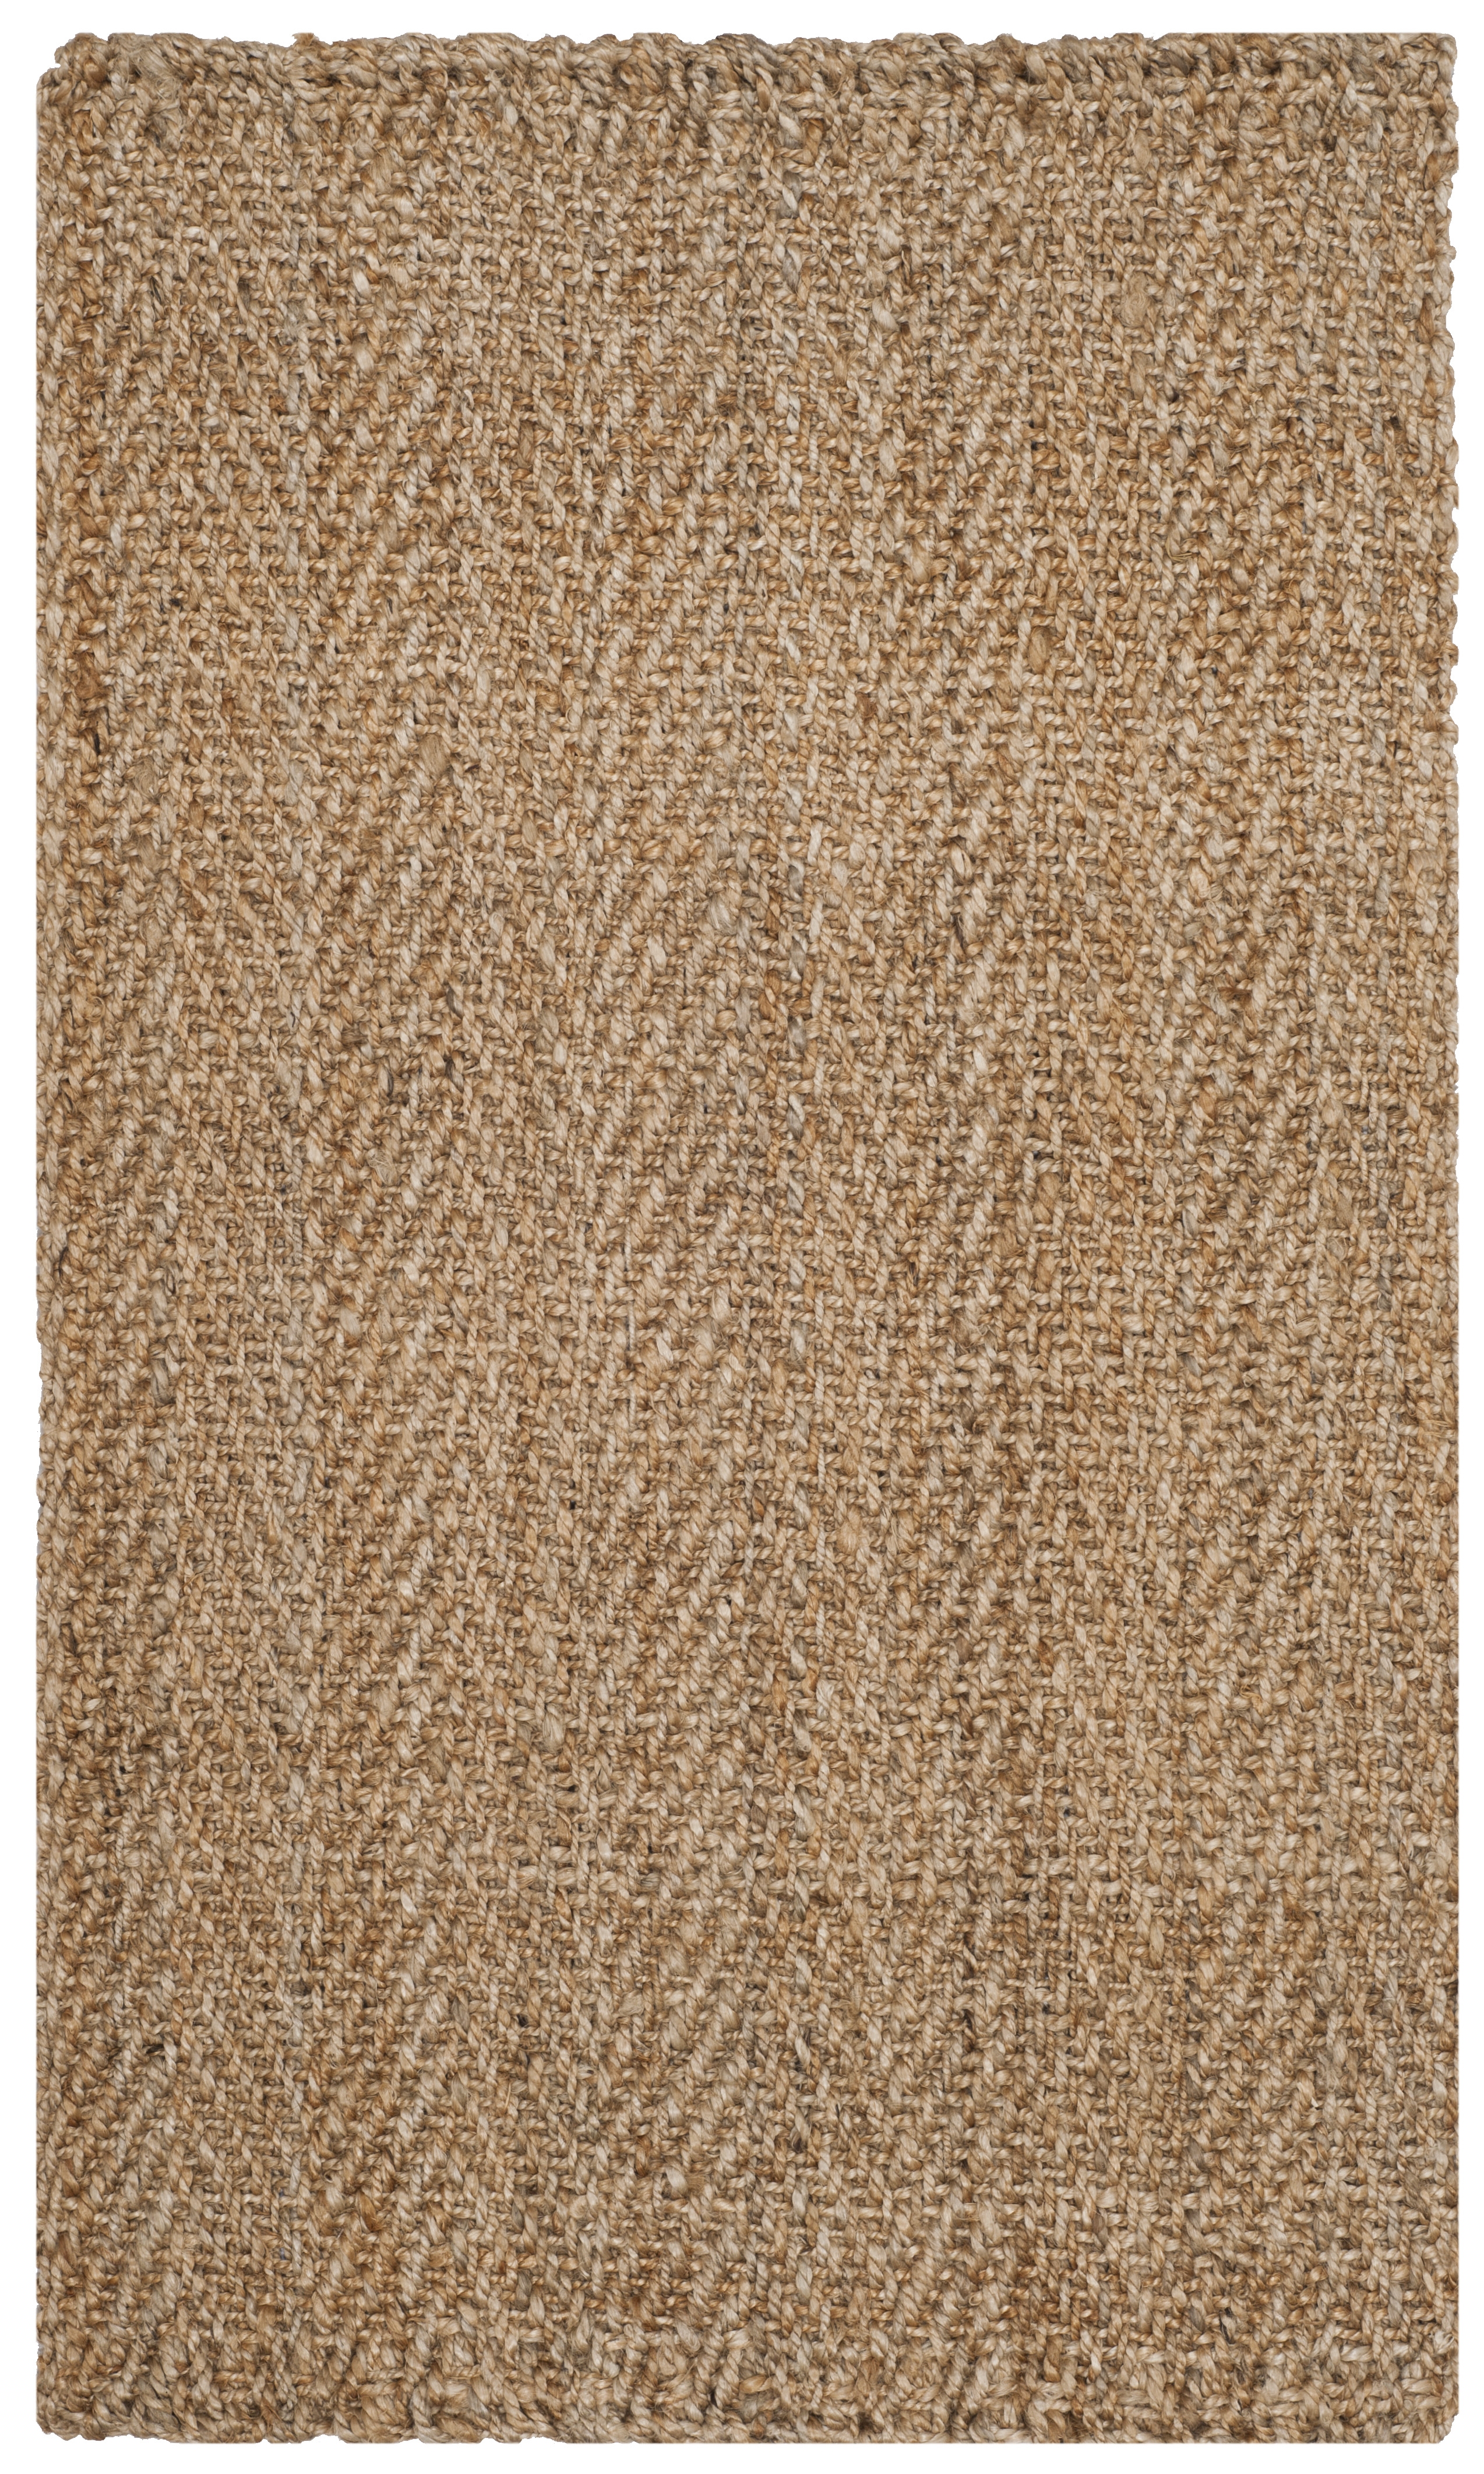 Arlo Home Hand Woven Area Rug, NF263A, Natural,  4' X 6' - Image 0